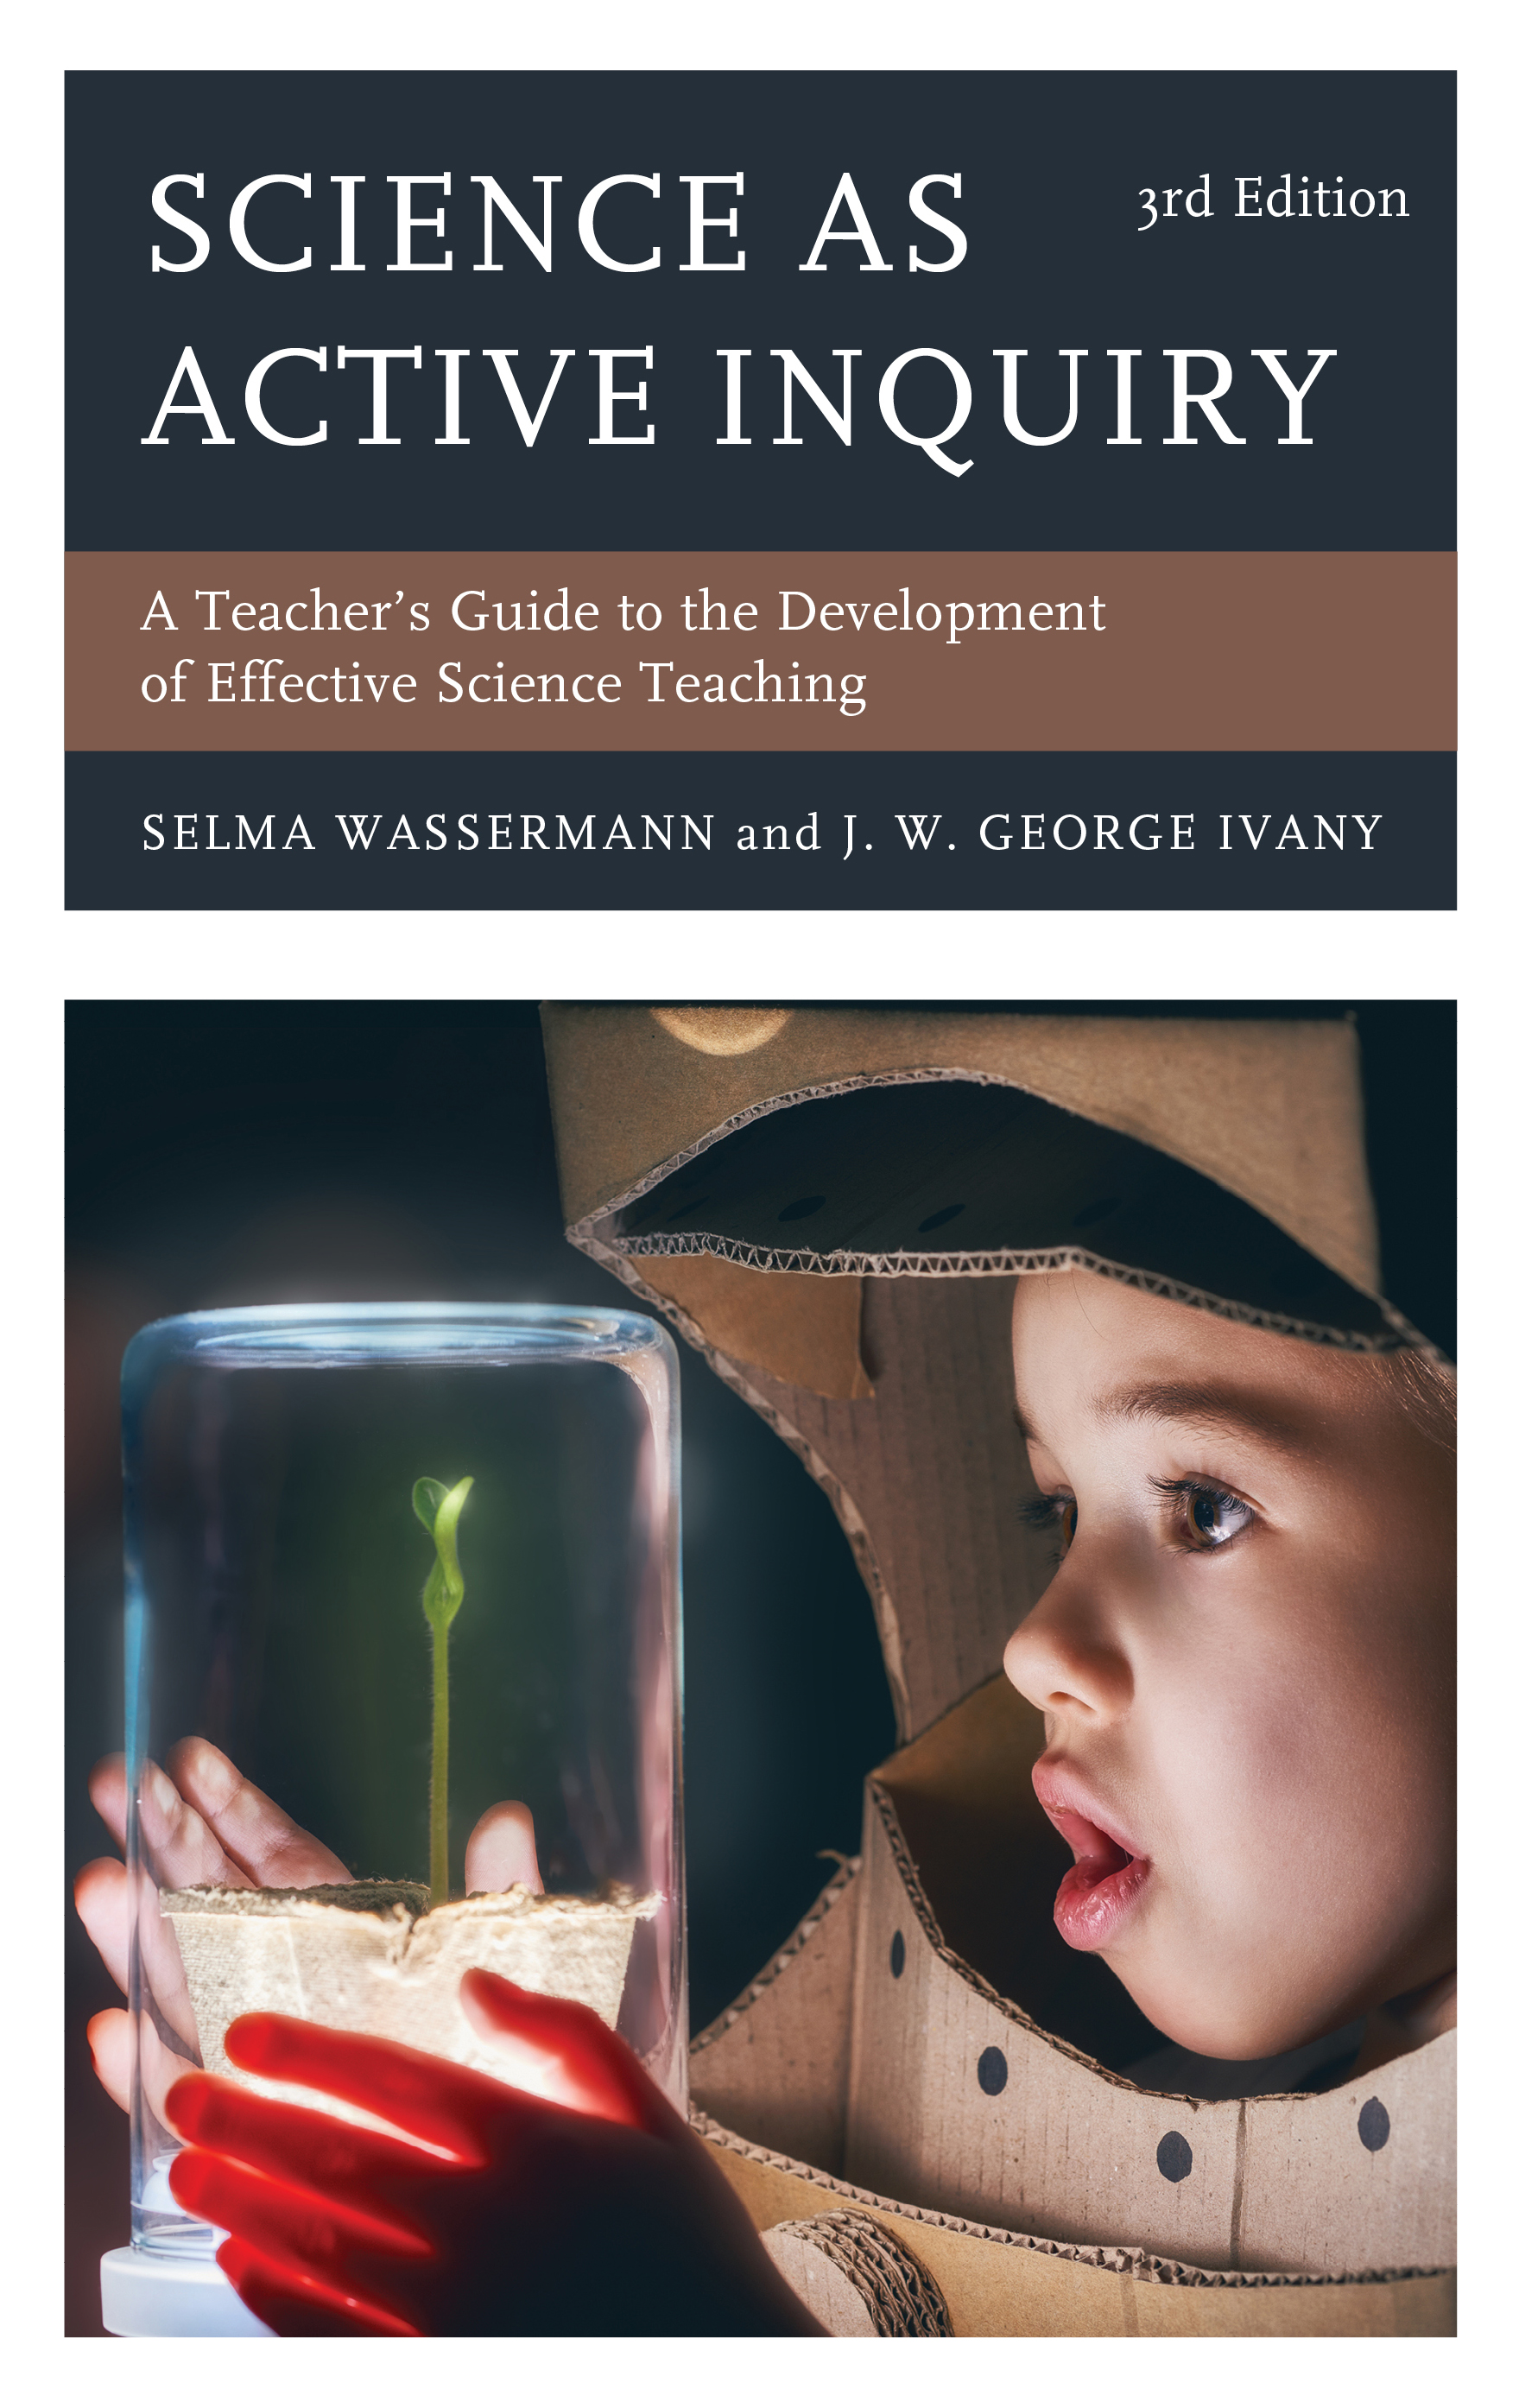 Science as Active Inquiry: A Teacher's Guide to the Development of Effective Science Teaching